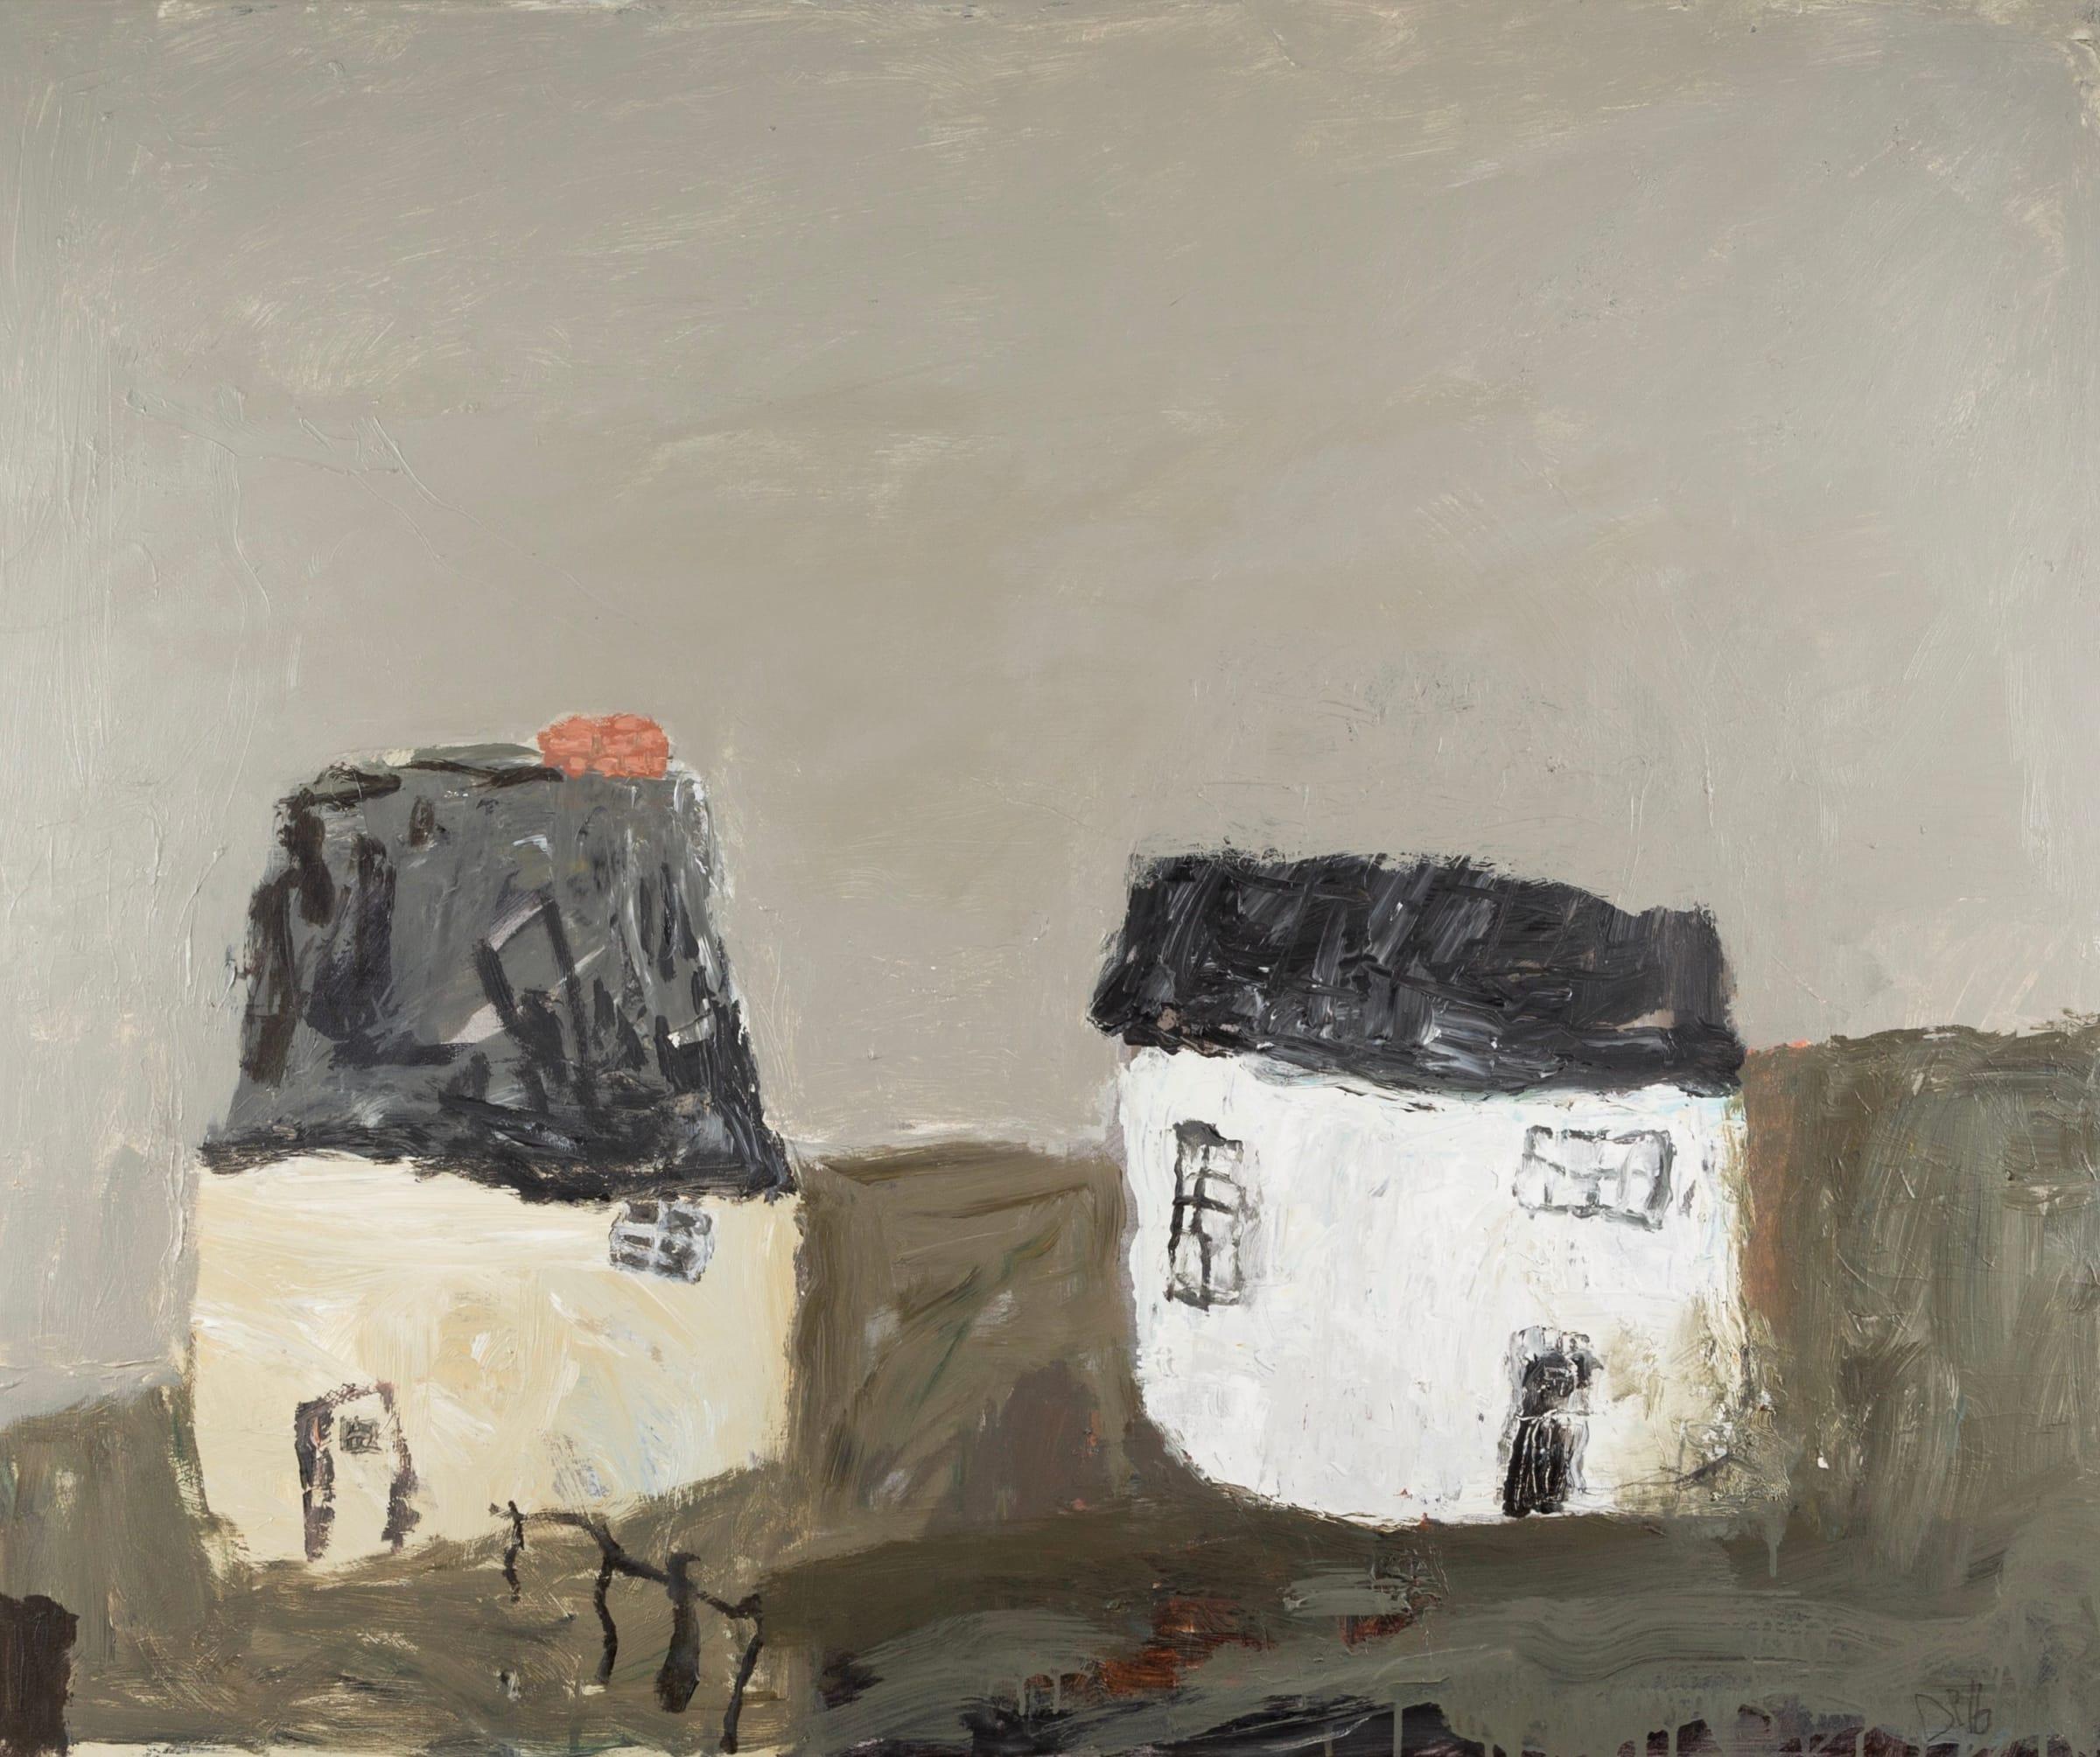 Farmyard, Acrylic on Canvas Painting by David Pearce B. 1963, 2016

Additional information:
Medium: Acrylic on canvas
Dimensions: 100 x 120 cm
39 3/8 x 47 1/4 in
Signed with initials and dated

David Pearce is a British painter.

After travelling